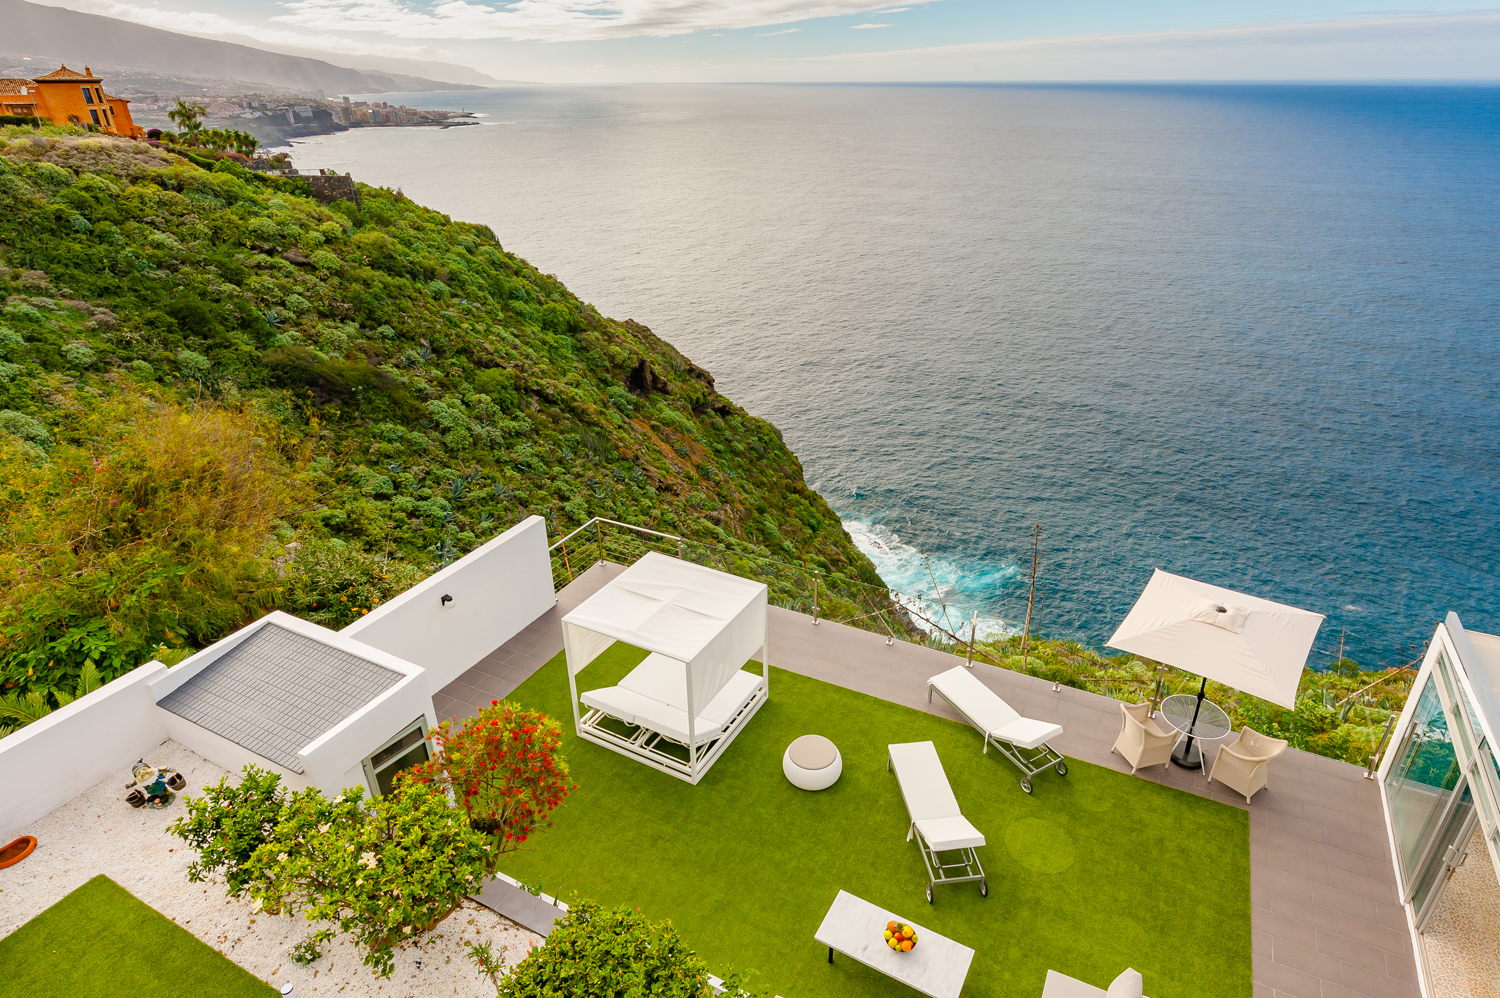 Cliffside on The Canary Islands